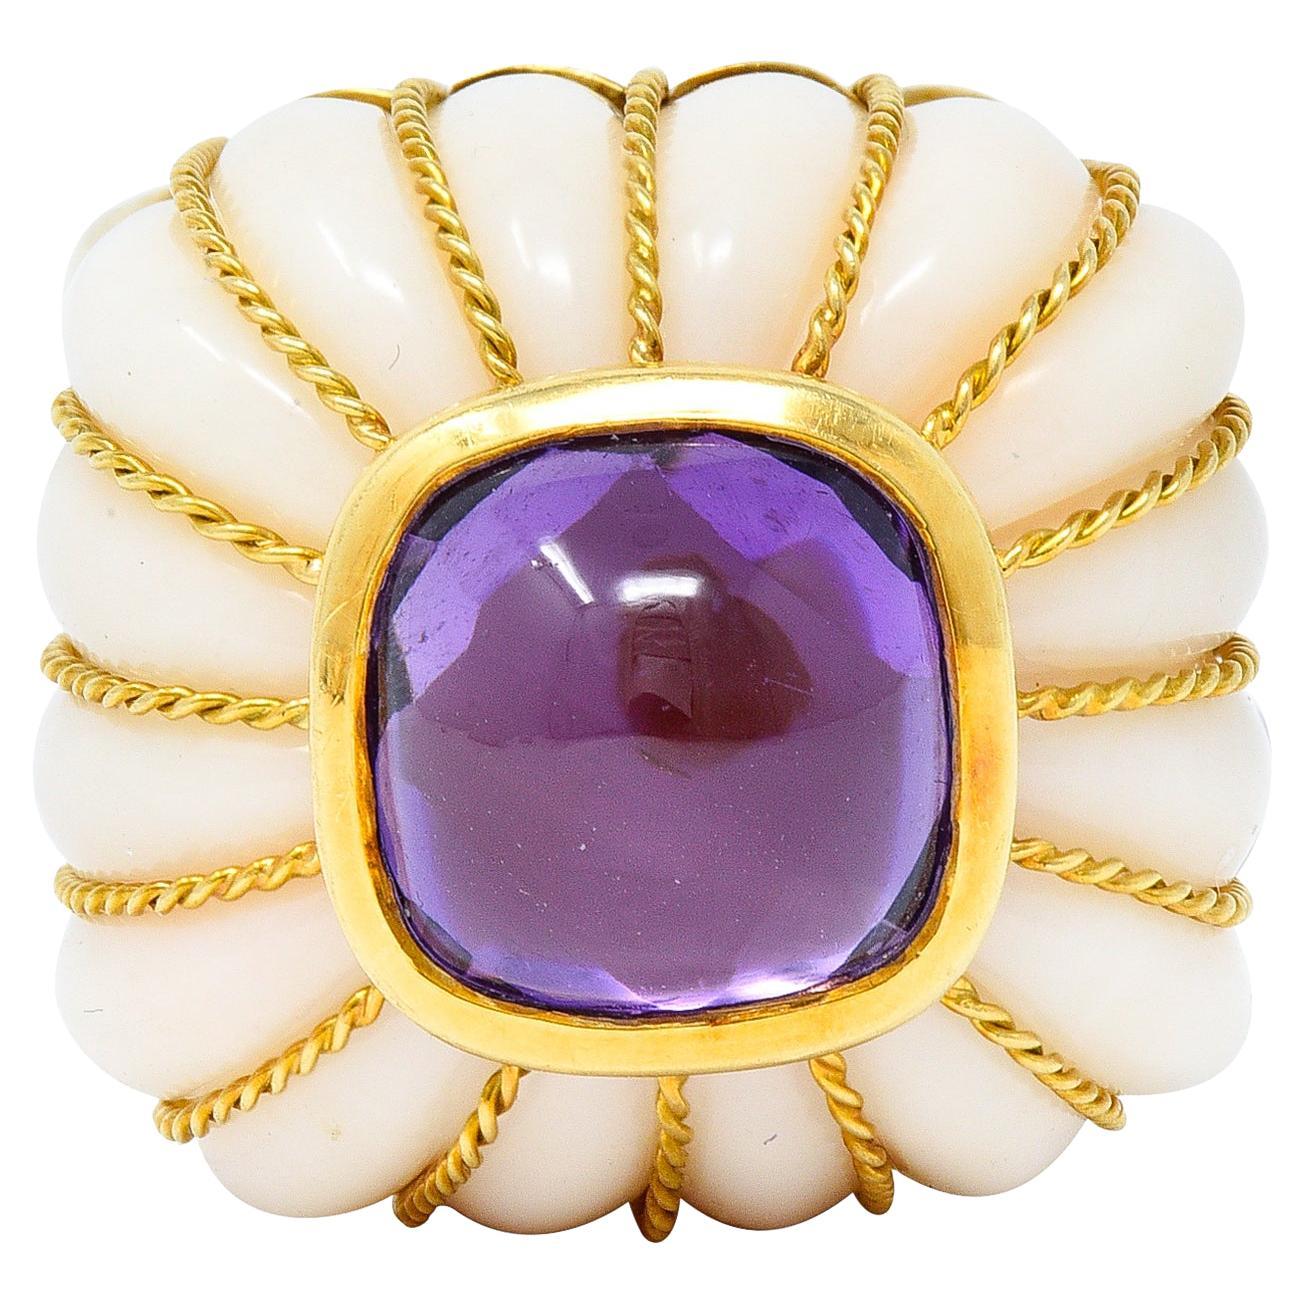 Centering a cushion shaped amethyst cabochon measuring 10.5 x 10.5 mm - transparent medium purple. Bezel set atop a cushion shaped coral - carved with fluted ridges fully around. Translucent cream in body color - ridges feature twisted rope motif